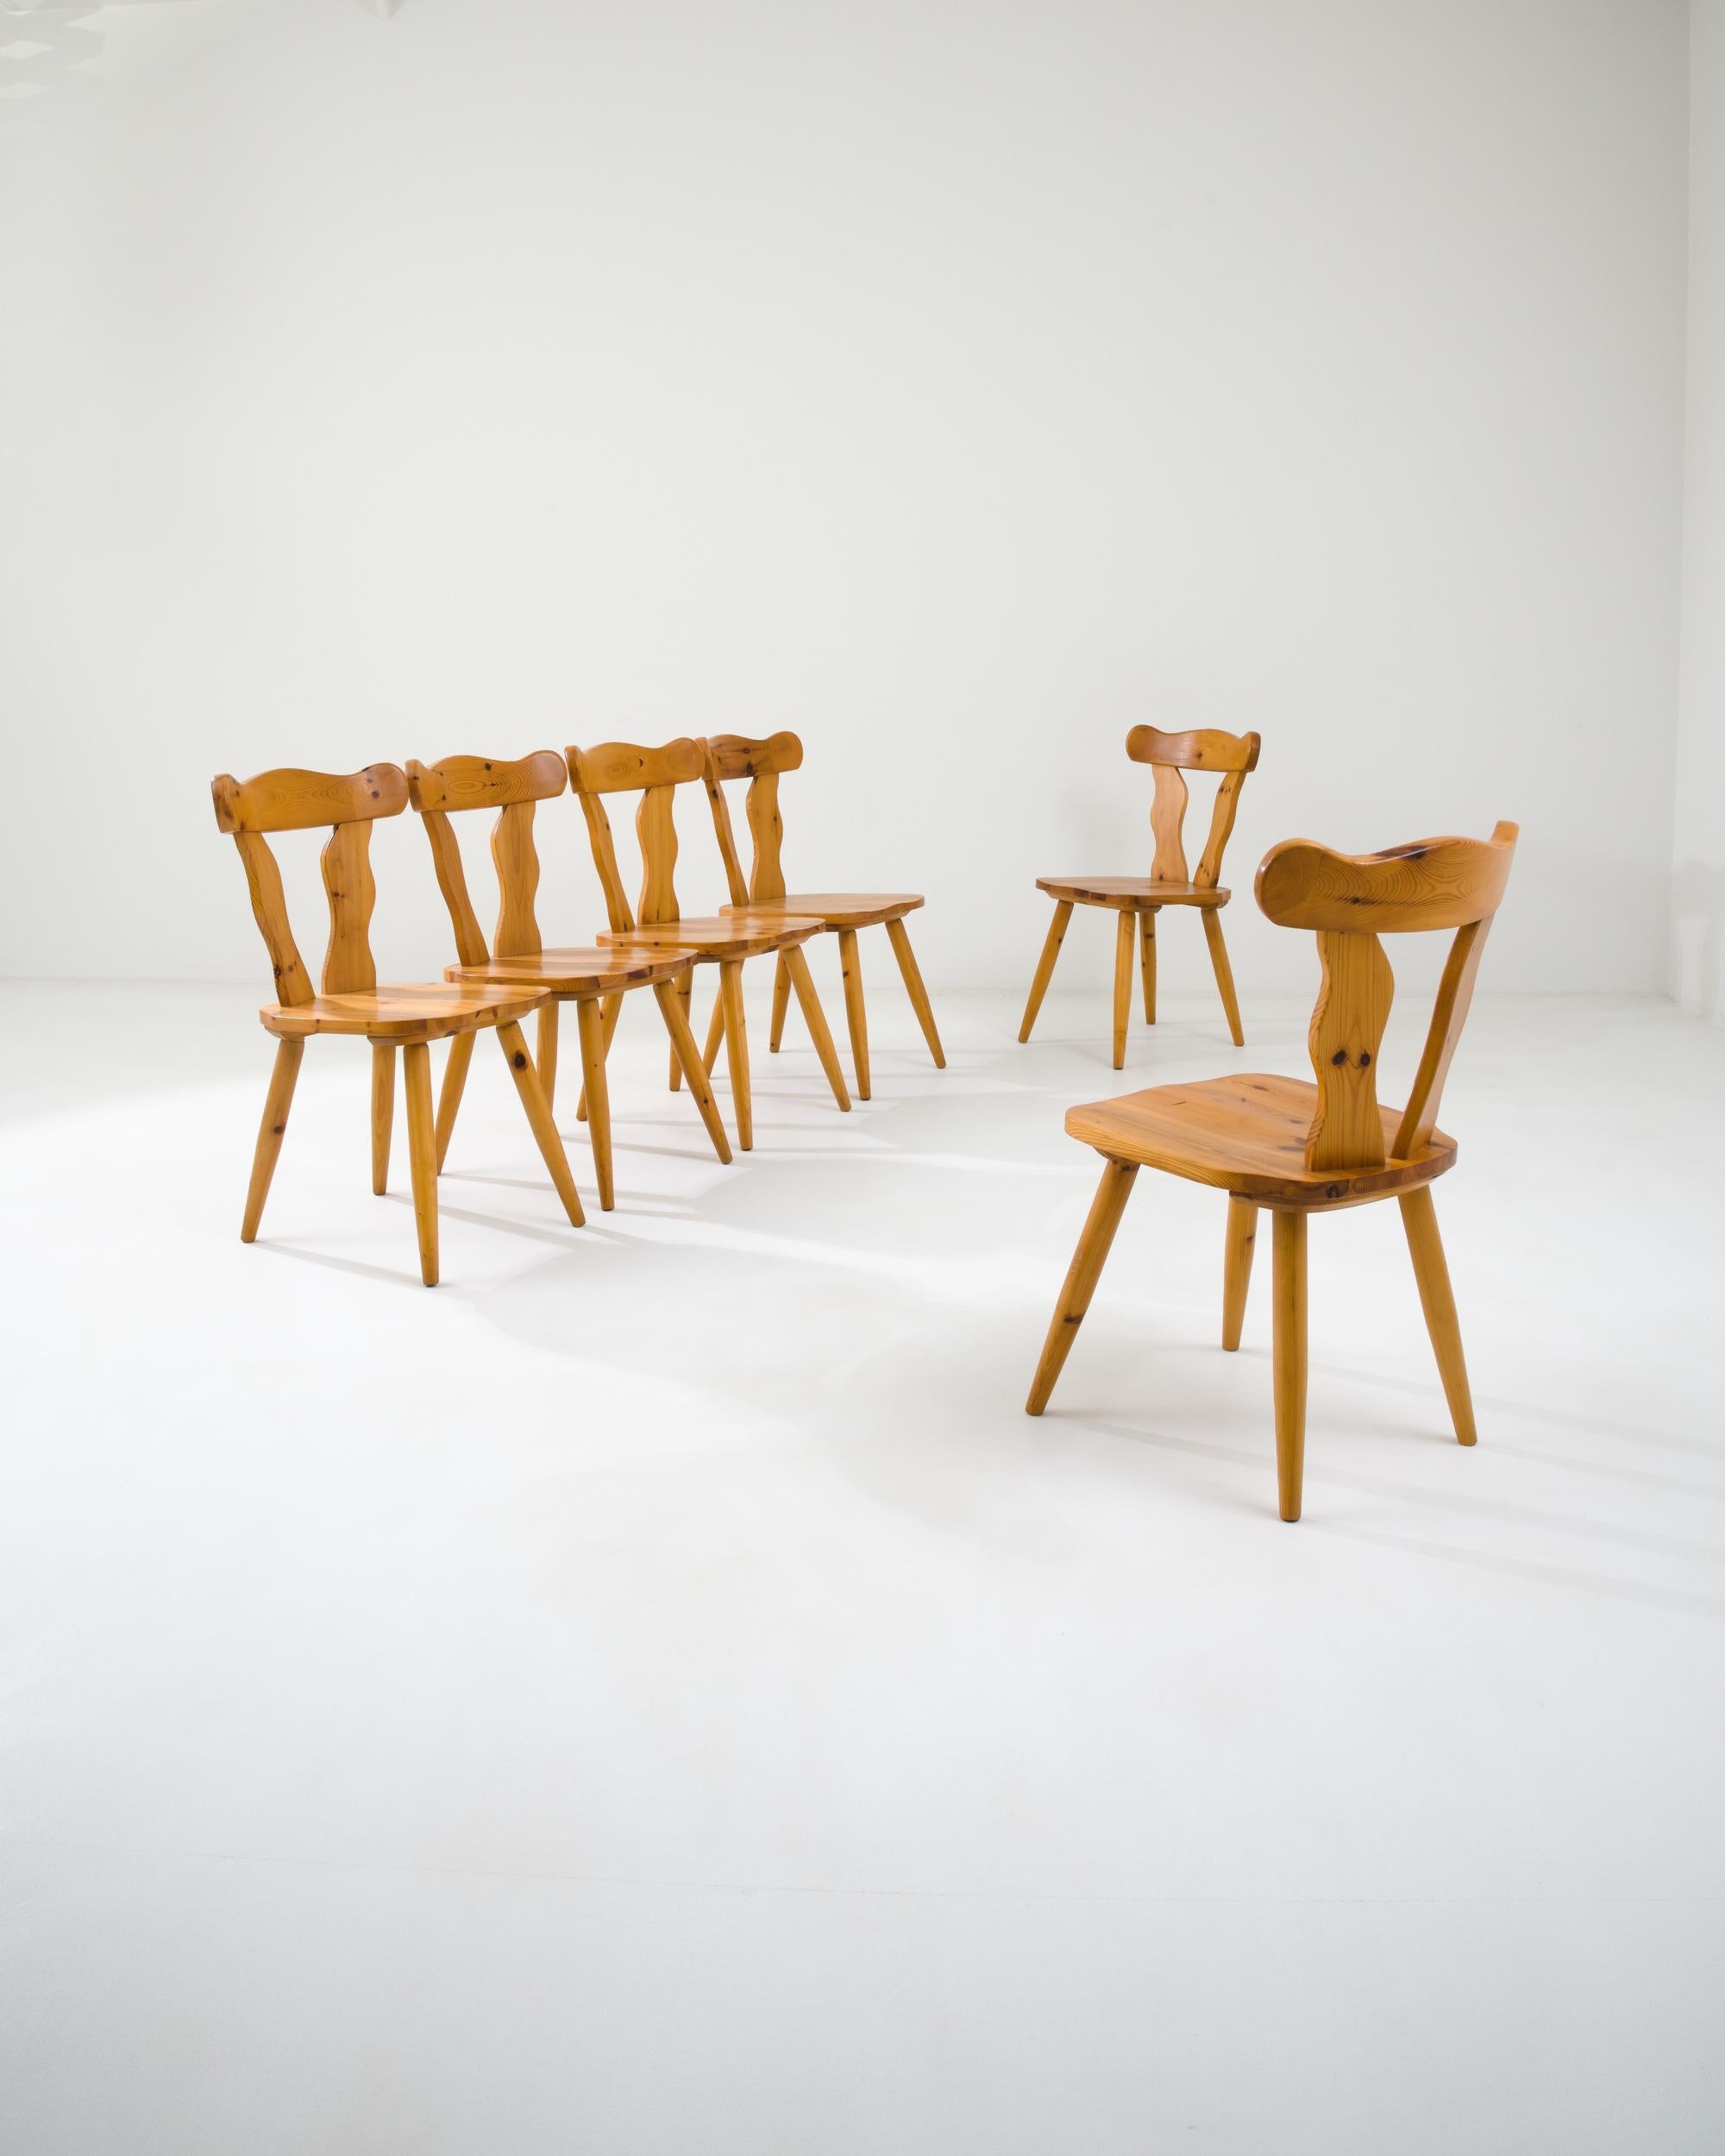 A set of wooden dining chairs created in 20th century, Scandinavia. From a distance, this set of dining chairs appears colloquial and rather minimal, while a closer inspection reveals the expert craftsmanship in their construction. The seats and